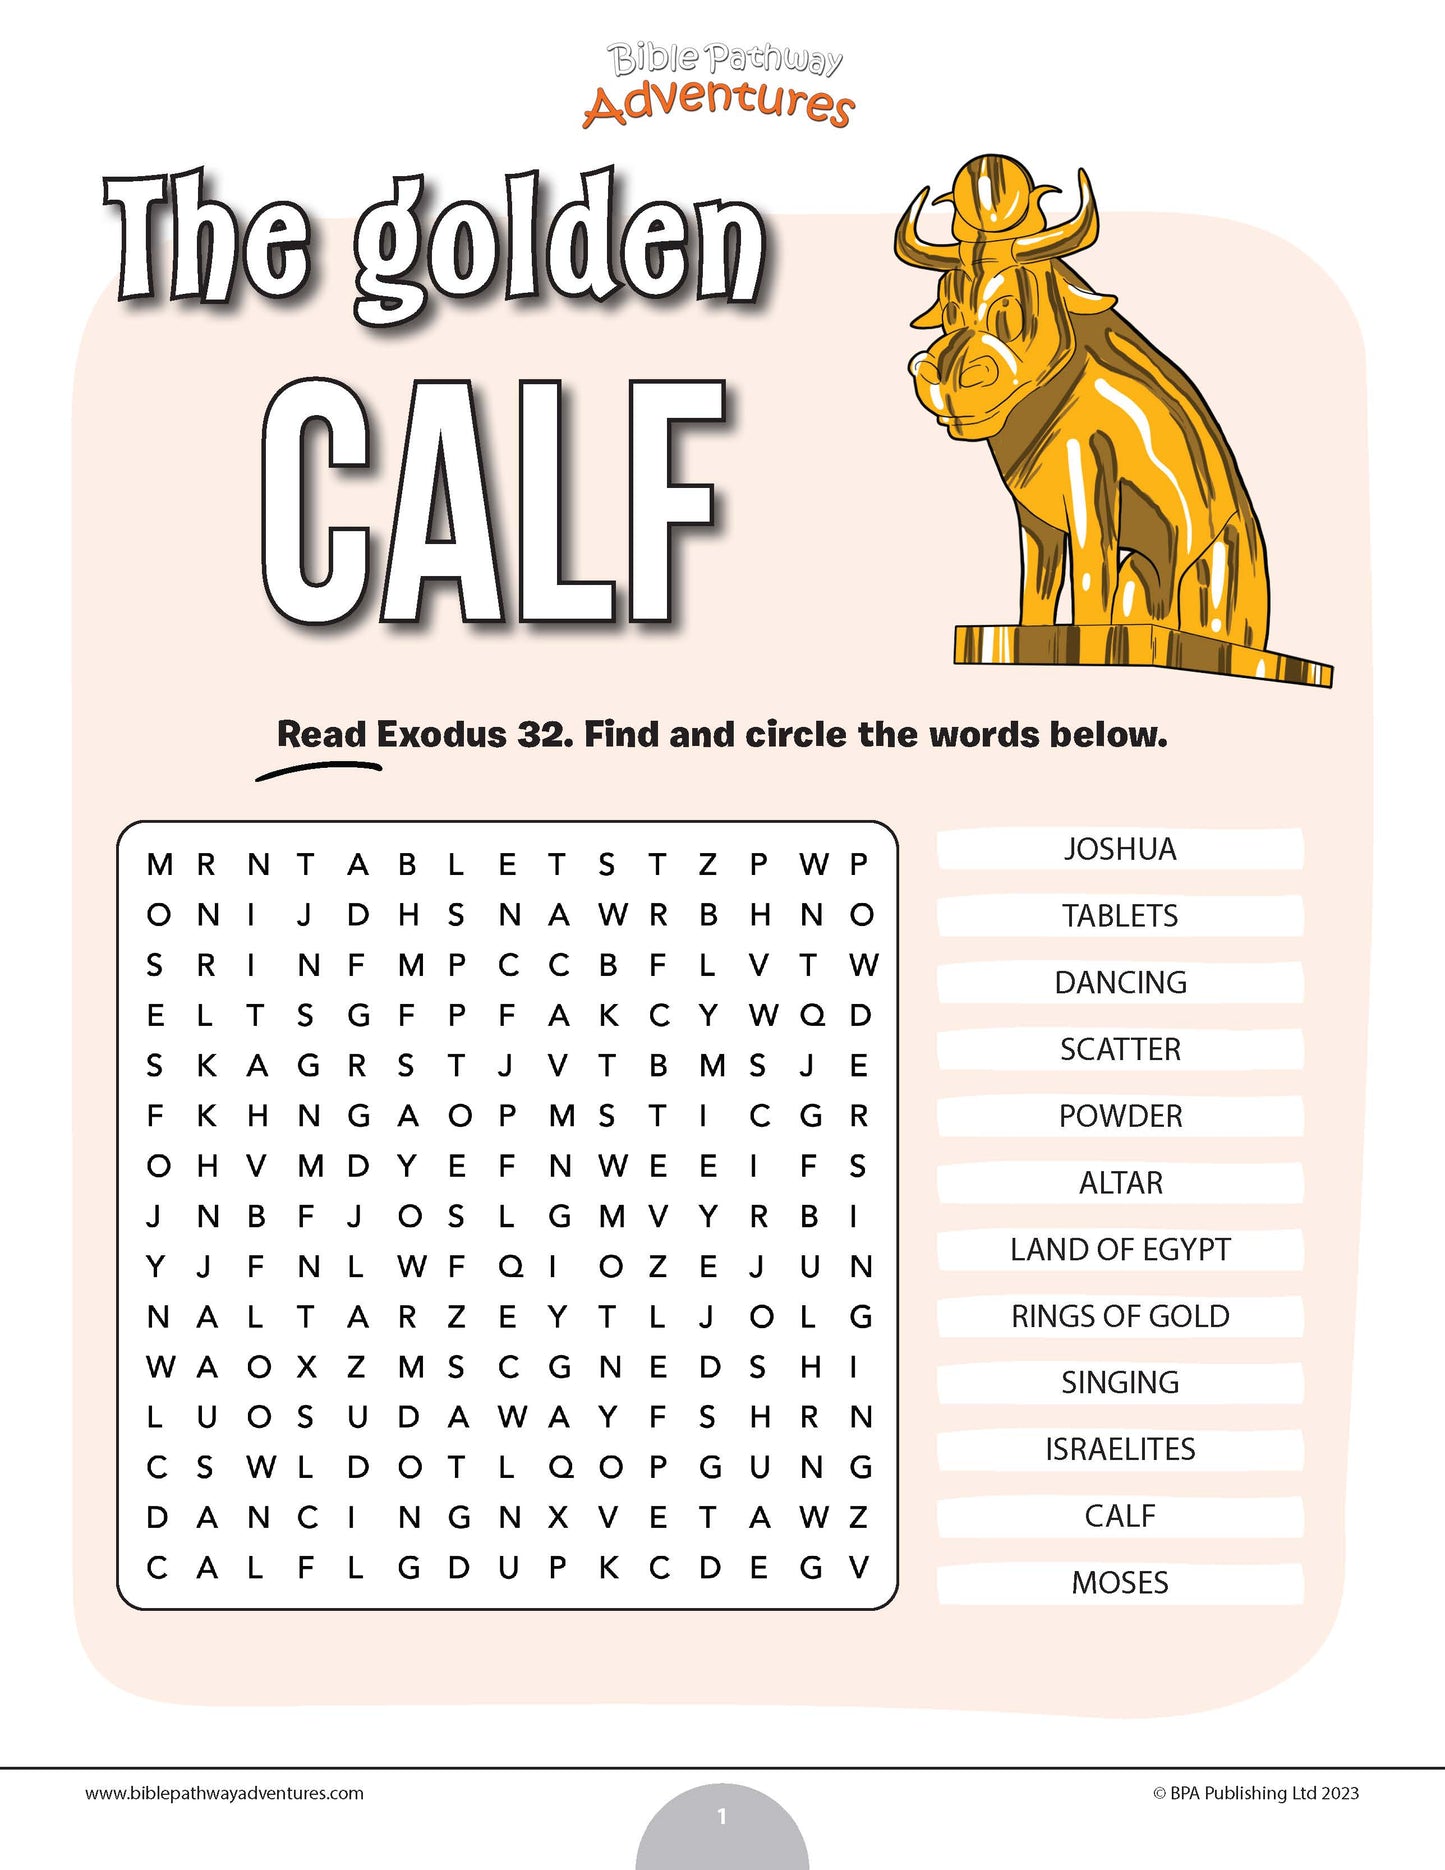 The Golden Calf word search (PDF)